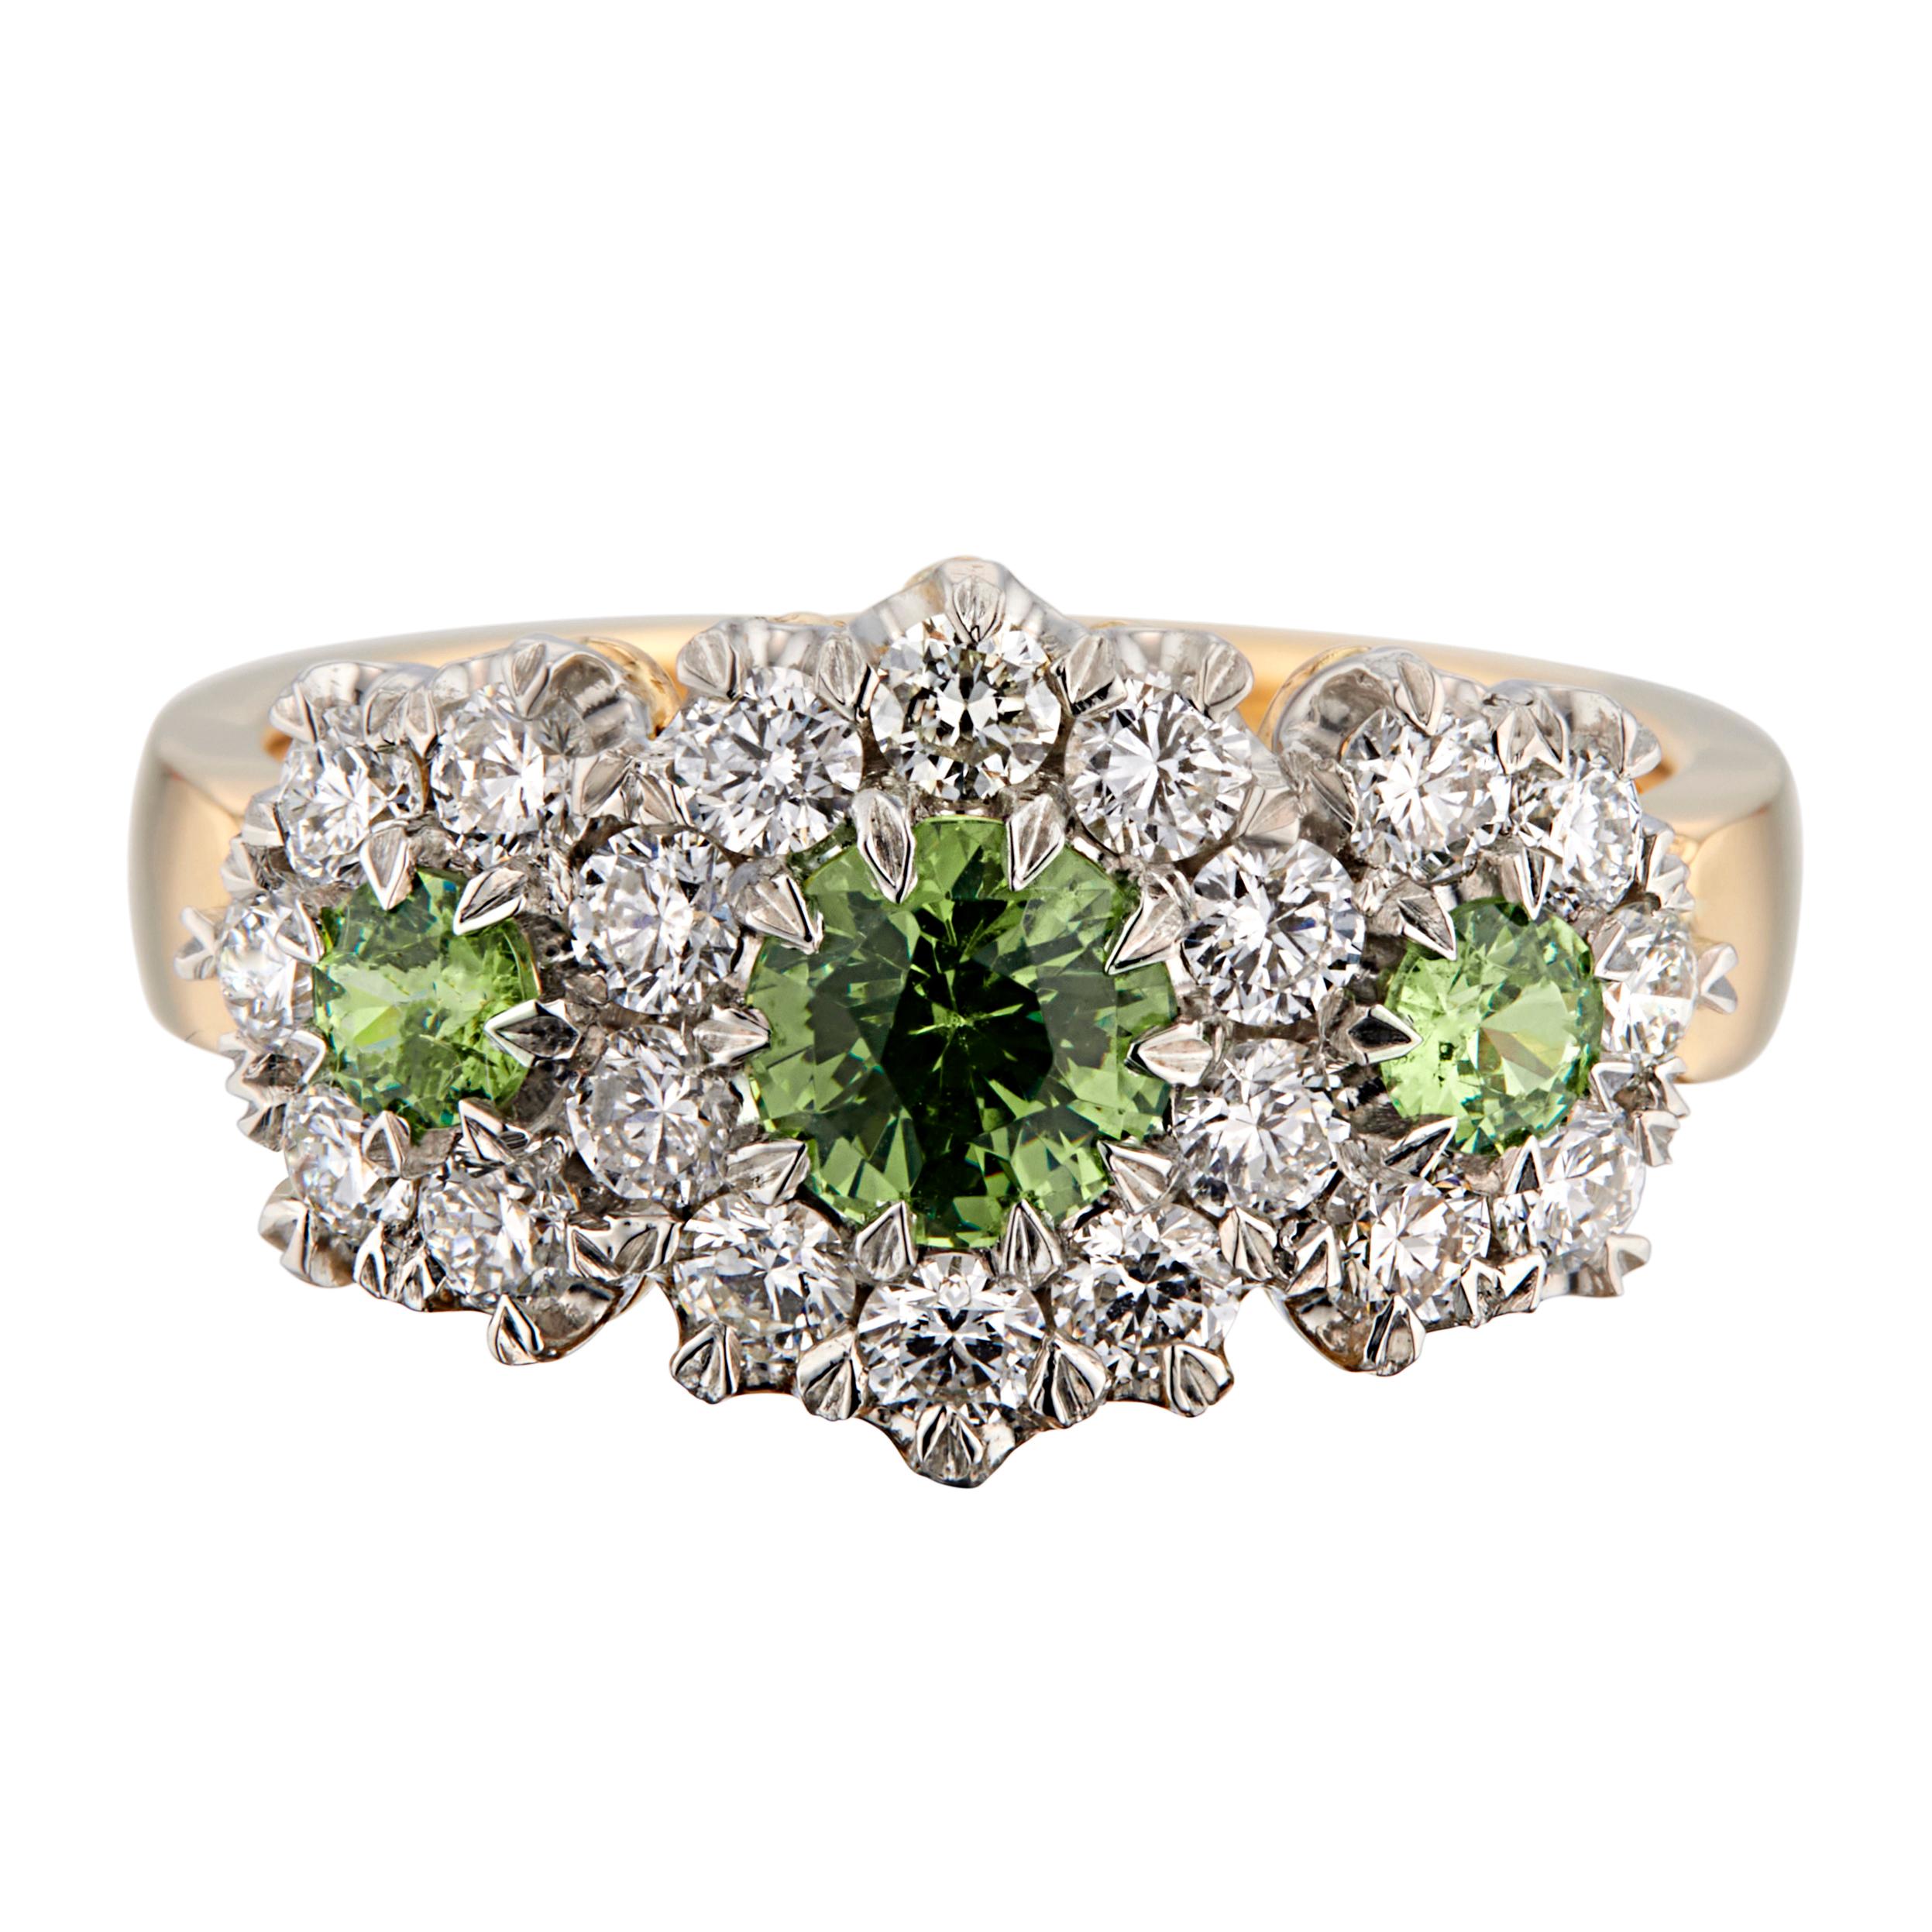 Green garnet and diamond engagement ring. .70cts green garnet with 2 round demantoid green accent garnets, each with a halo of round brilliant cut diamonds in a platinum top and 18k yellow gold shank. 

1 demantoid green garnet, approx. .70 carats